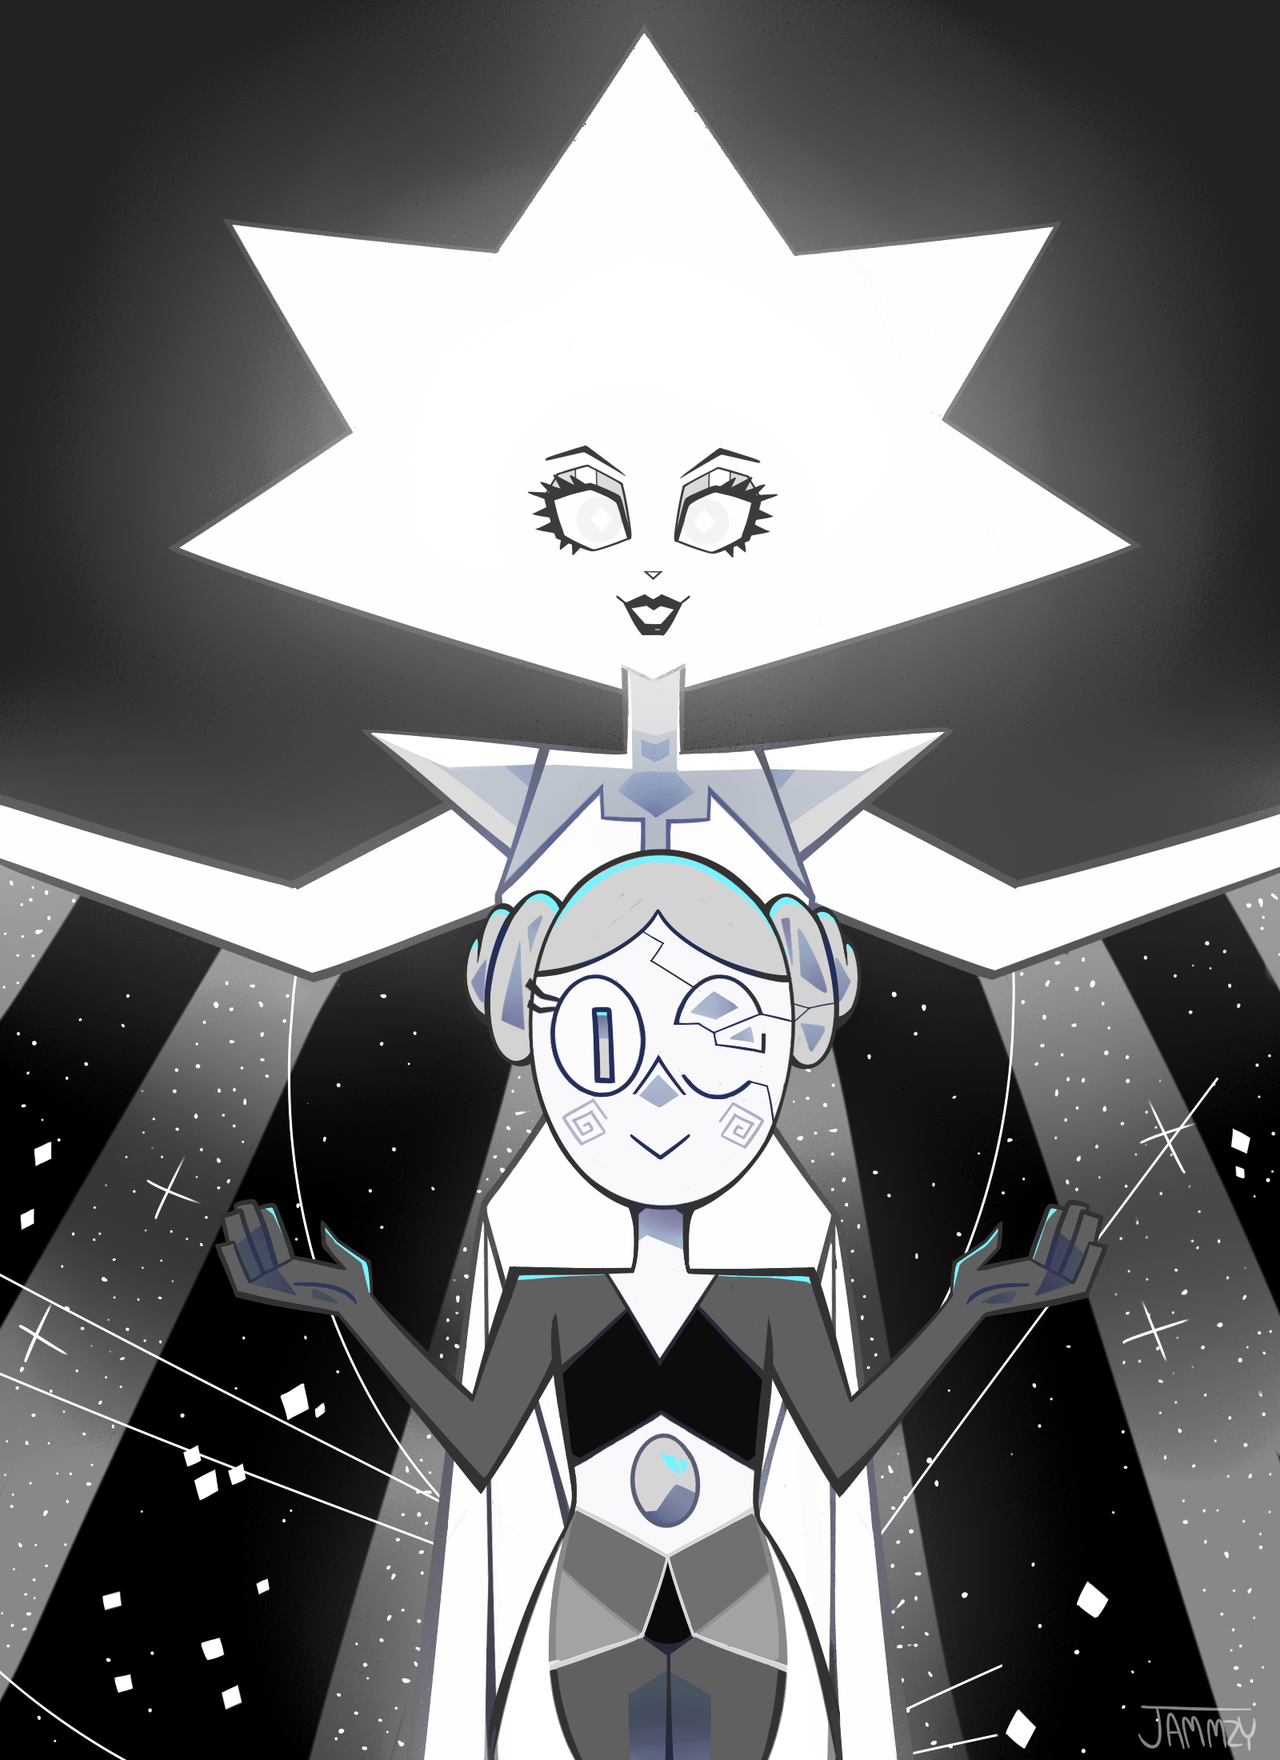 A diamond and her pearl!